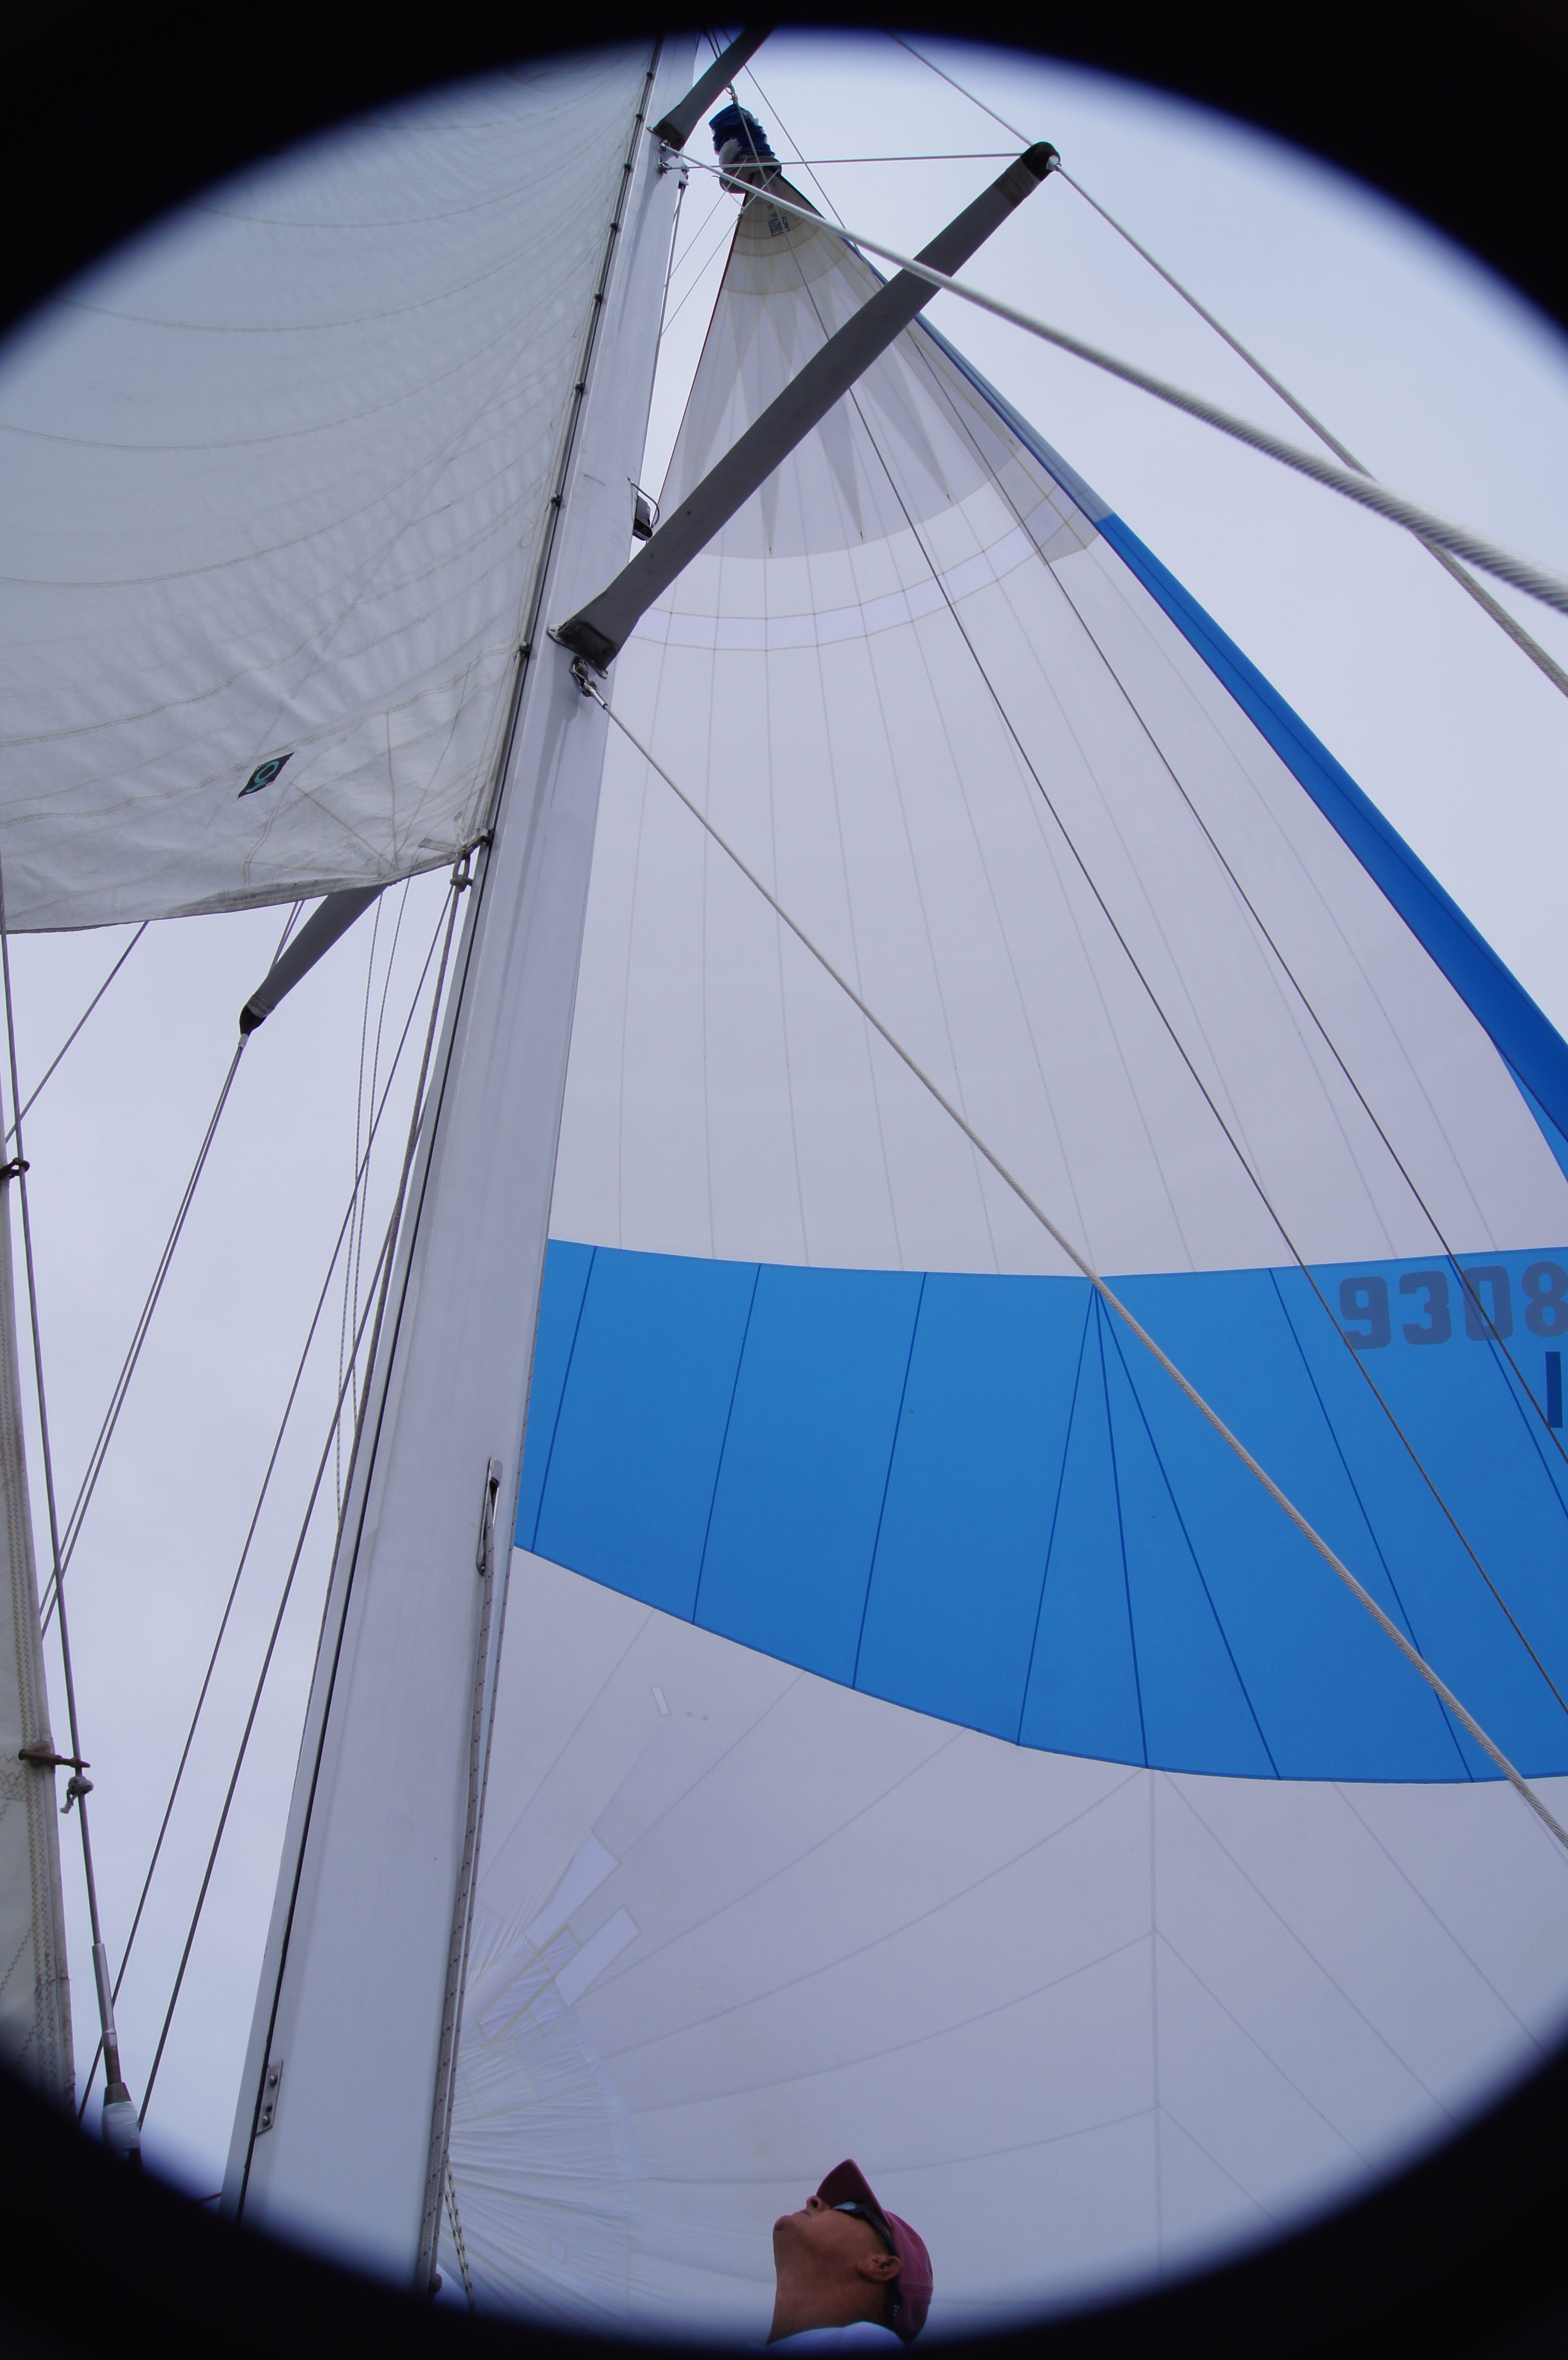 Captain looking up at Blue and White Sail on boat